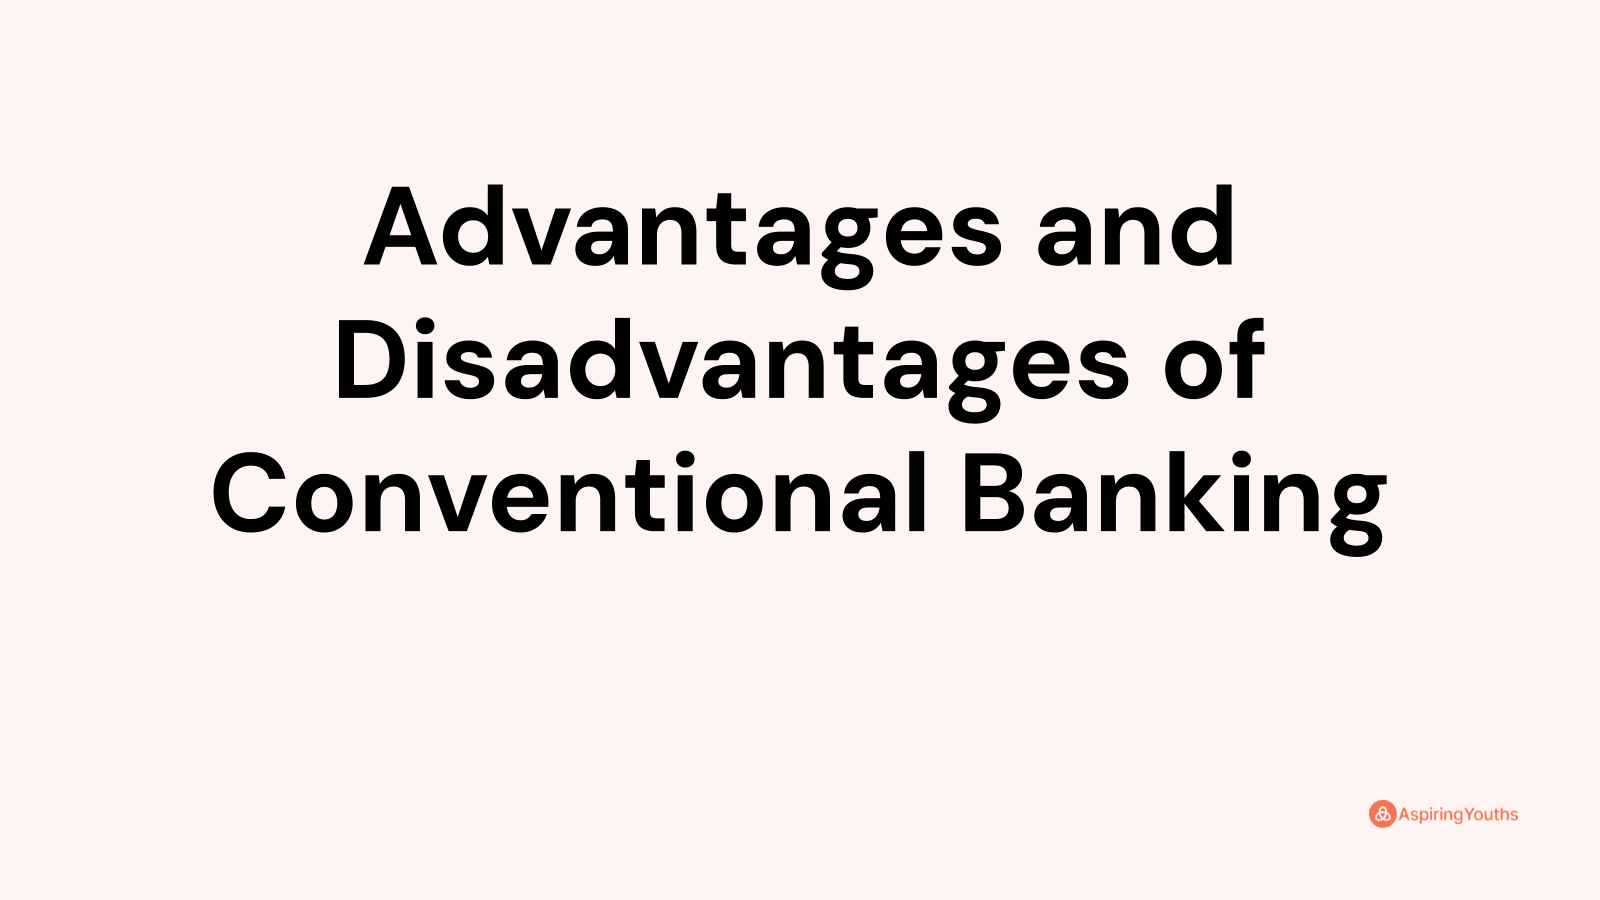 Advantages and disadvantages of Conventional Banking